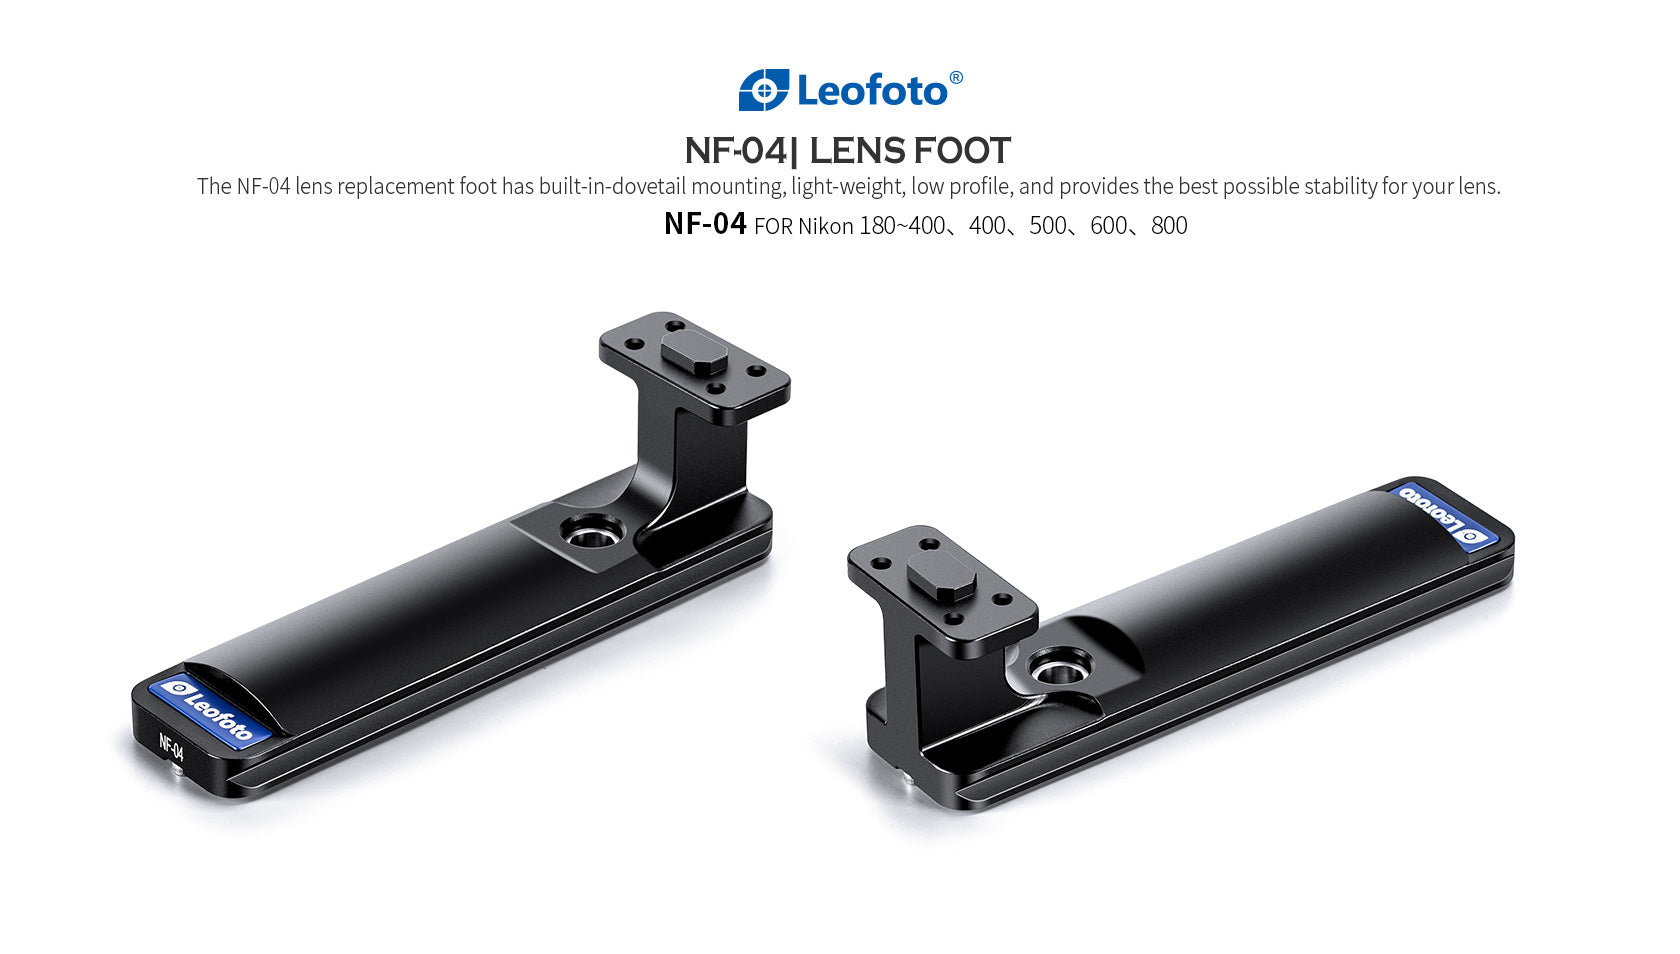 "Open Box" Leofoto NF-04 Replacement Foot for NIKON AFS 180~400, 400, 500, 600, 800